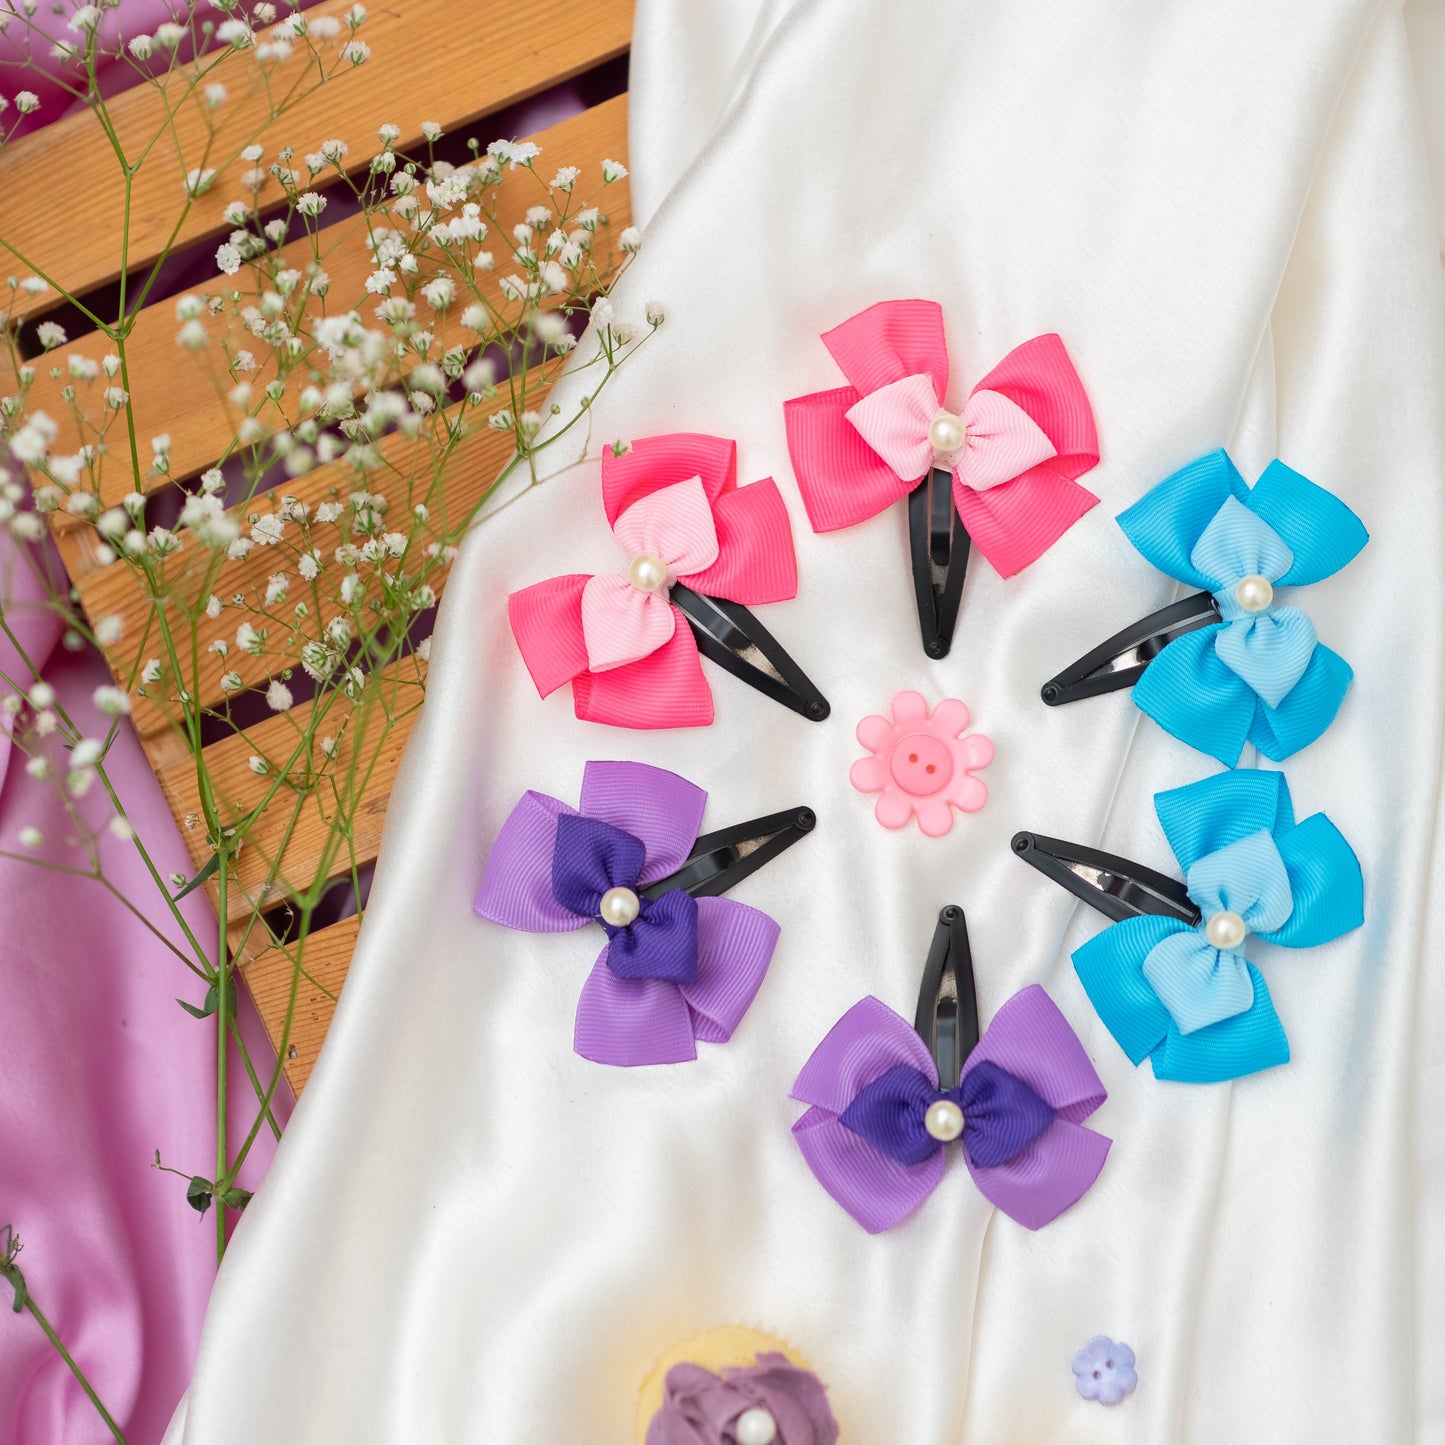 Graceful bow with decorative flower and pearls adorenments on tic- tac pins - Multicolor (Set of 3 pairs - 6 quantity)